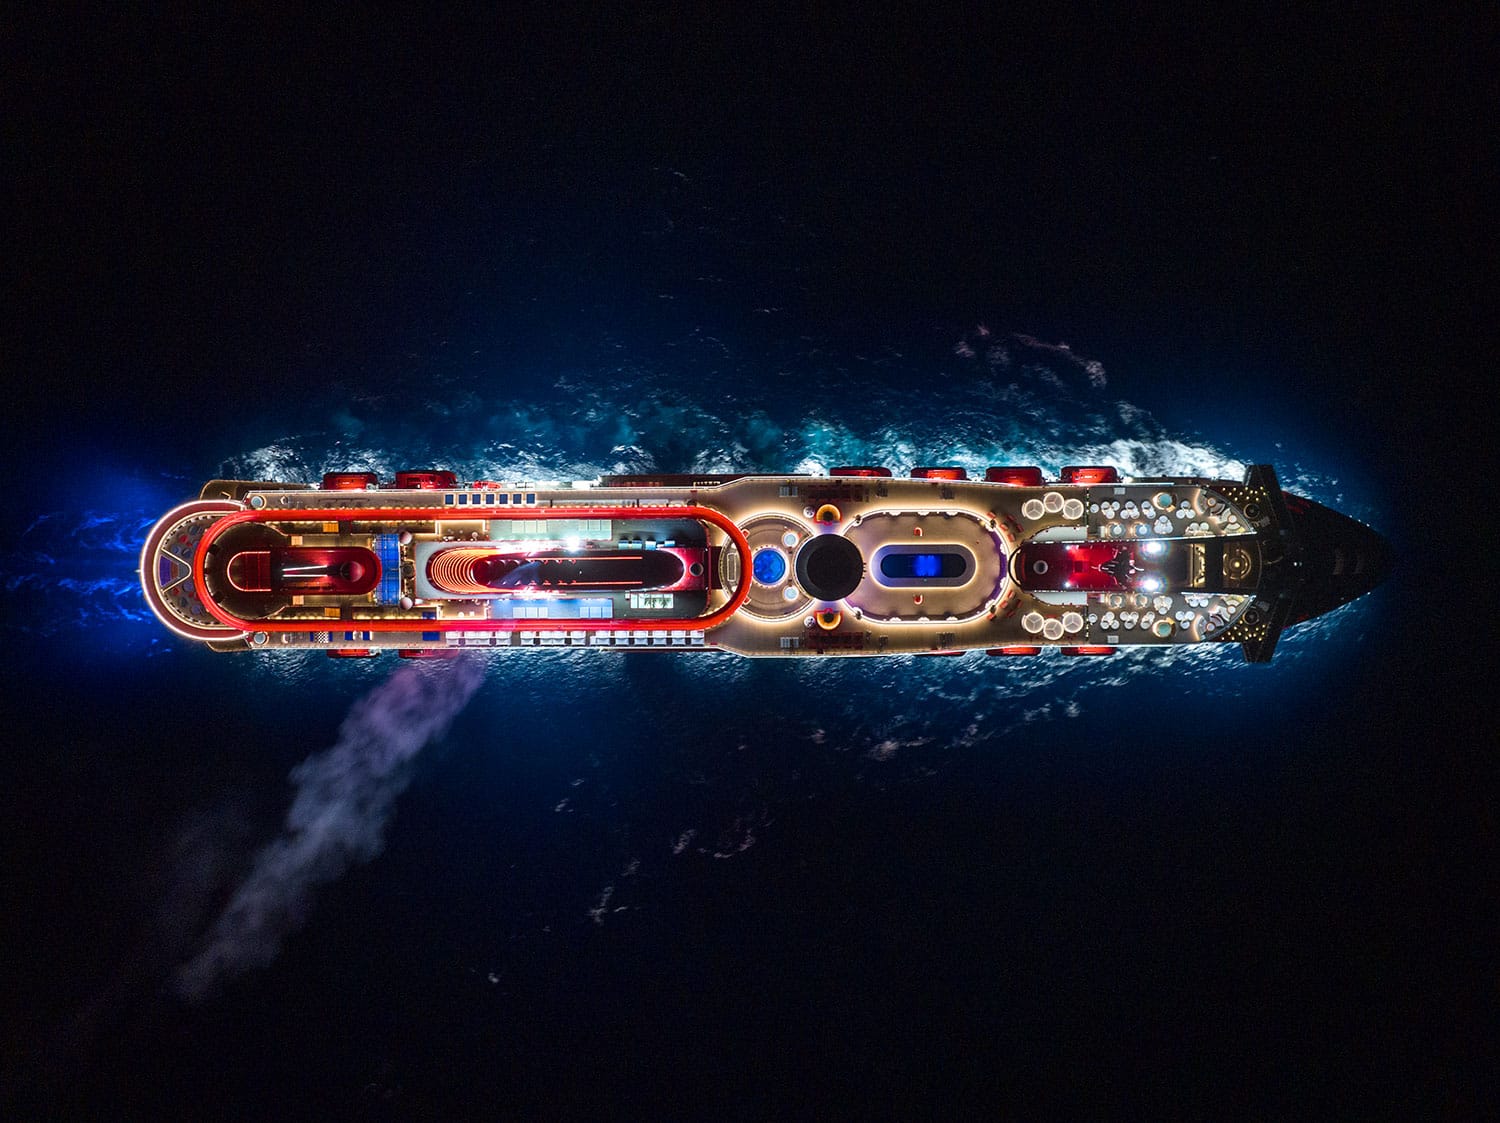 An aerial view of the Virgin Voyages Scarlet Lady cruise ship on the open waters at night.